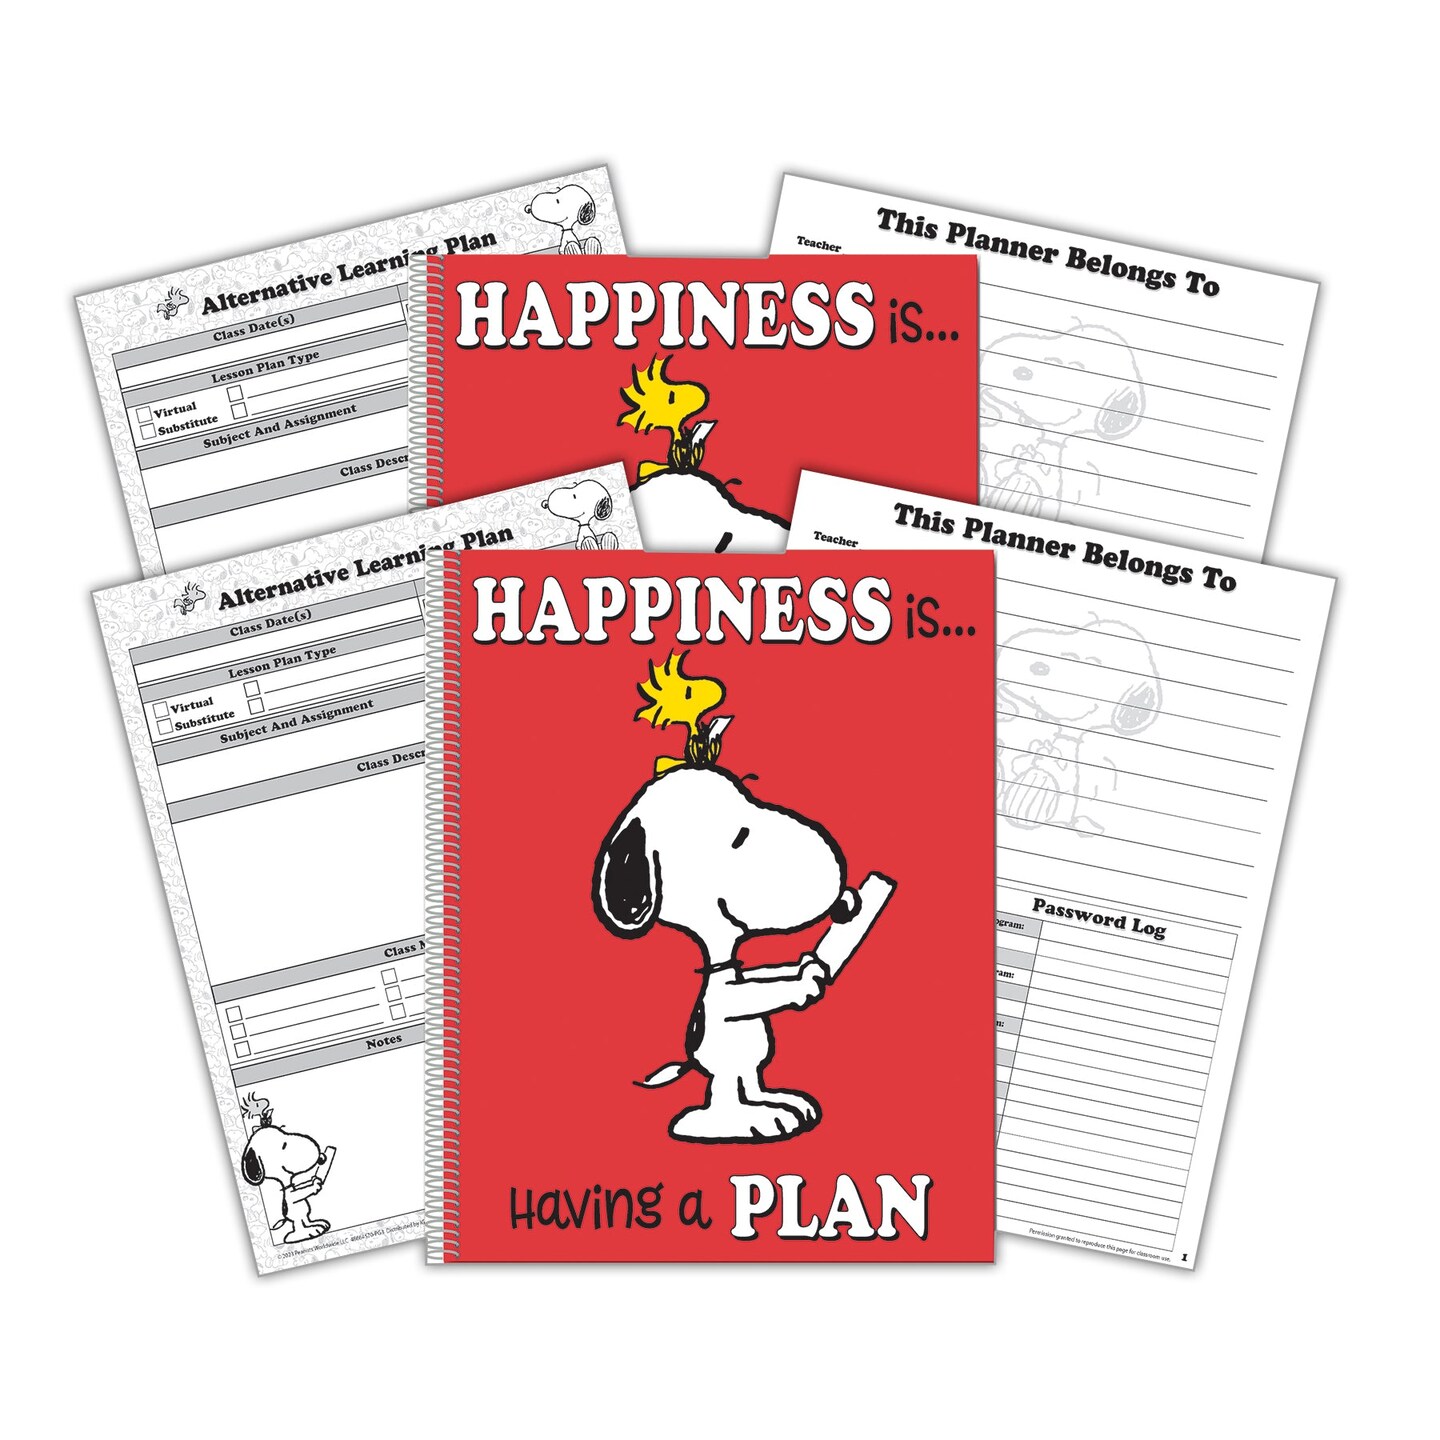 Peanuts&#xAE; Lesson Plan &#x26; Record Book, Pack of 2